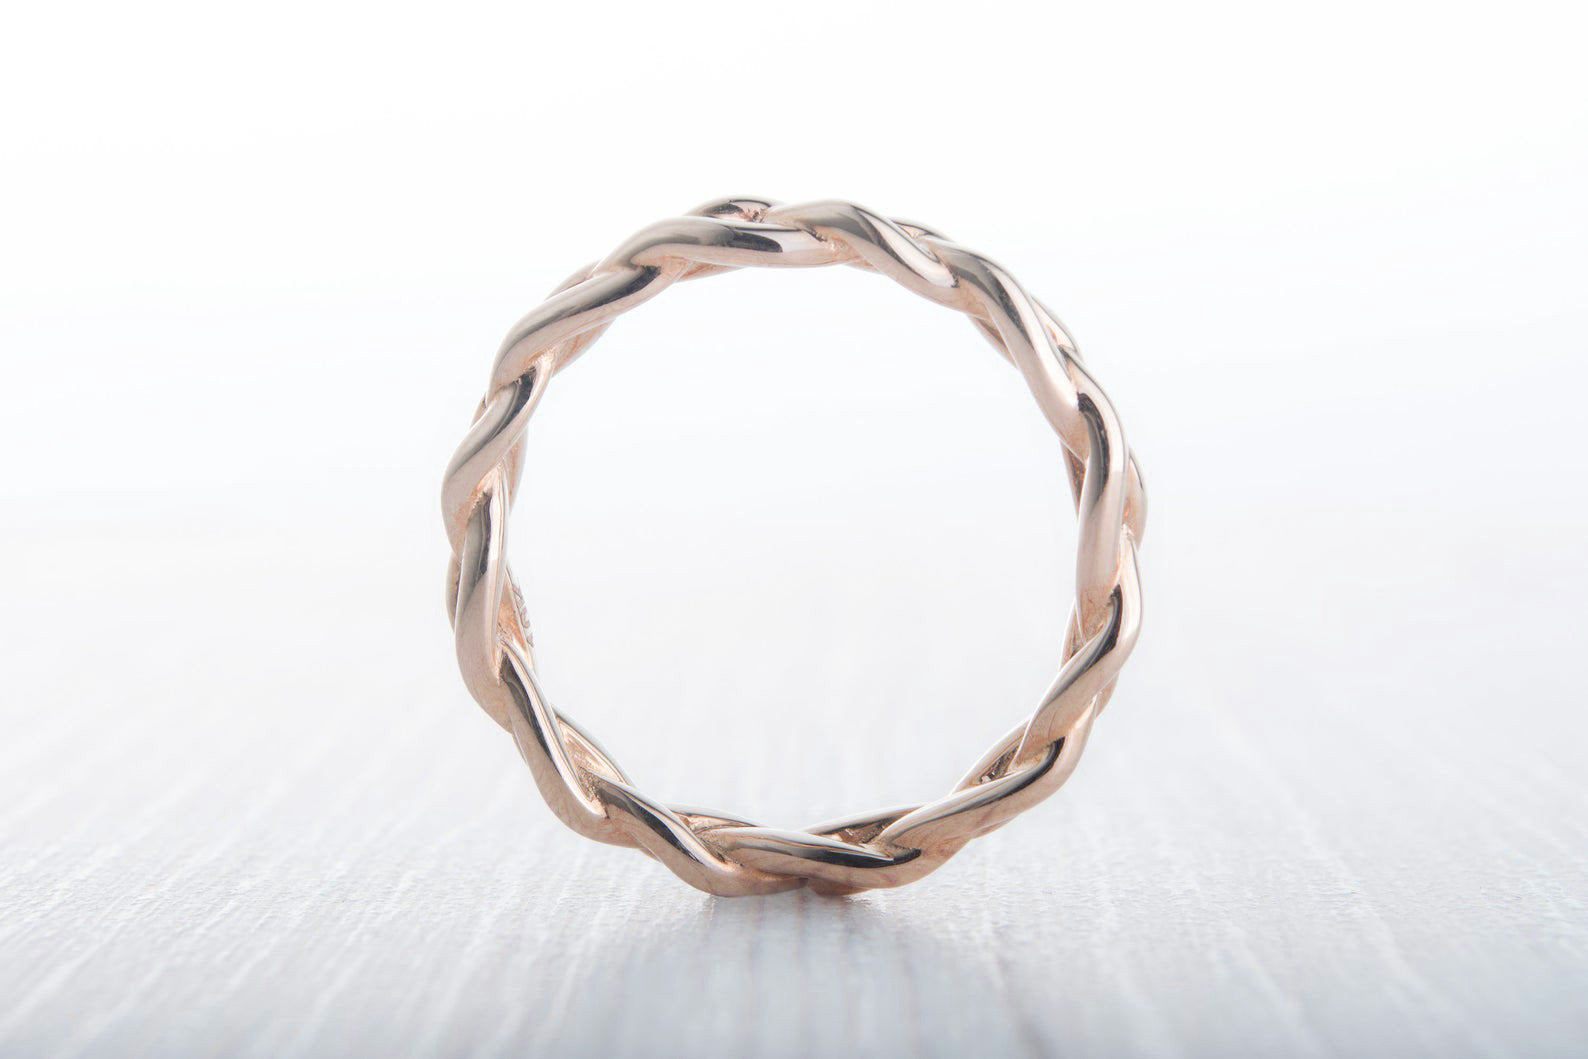 3mm Wide Braided Weave Ring in Rose Gold Filled - wedding ring - weddi –  Aladdins Cave Jewellery Ltd